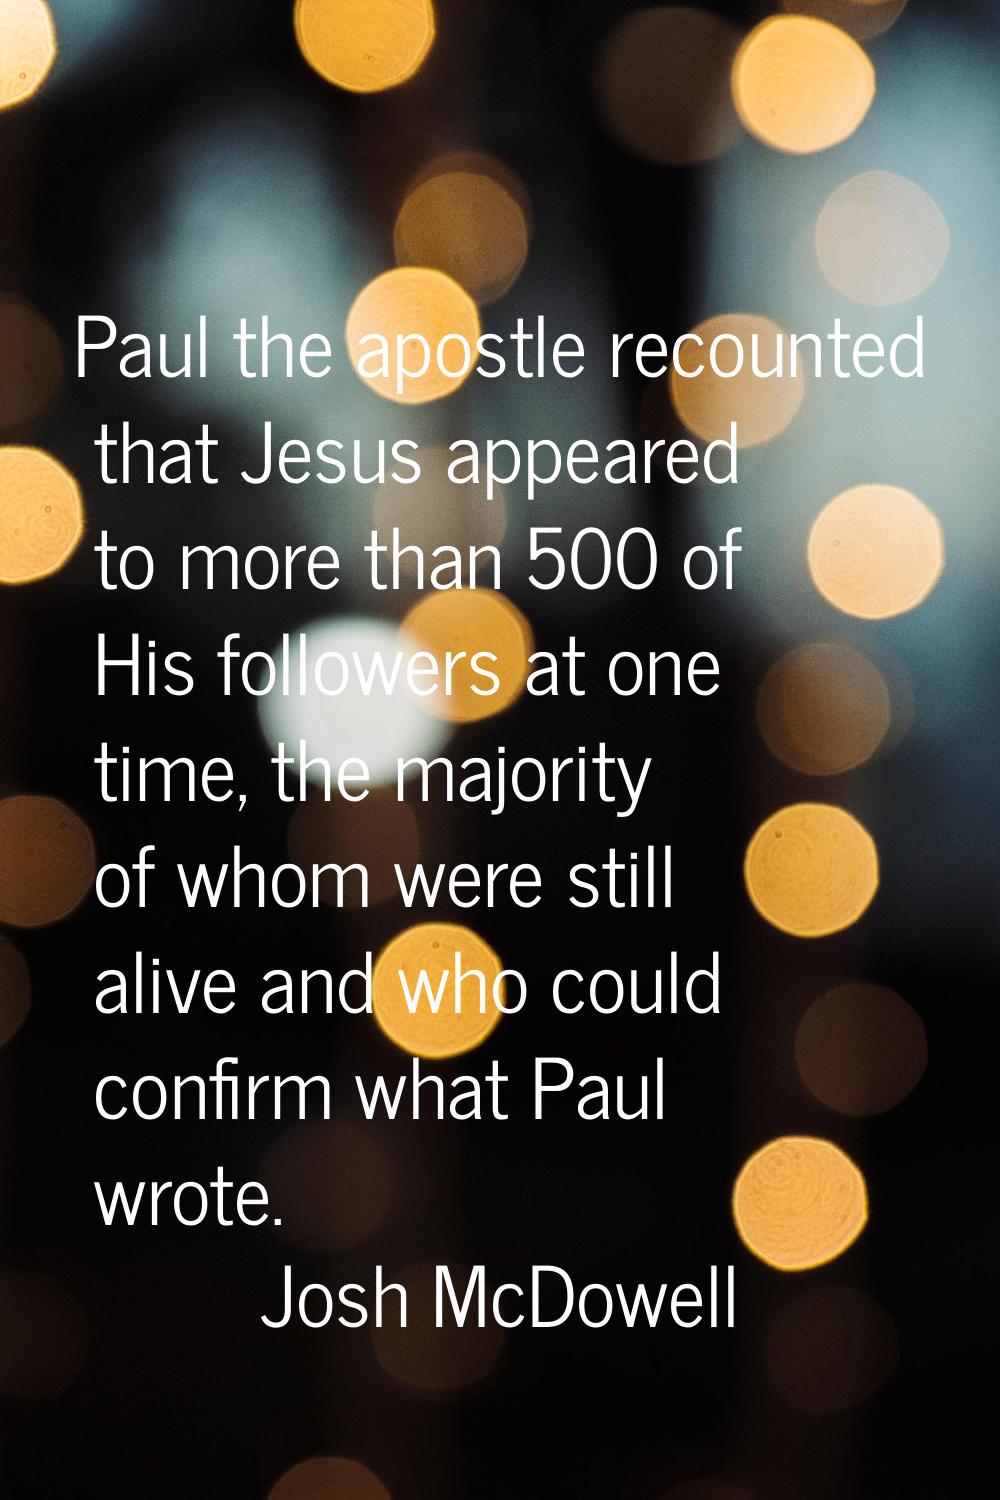 Paul the apostle recounted that Jesus appeared to more than 500 of His followers at one time, the m